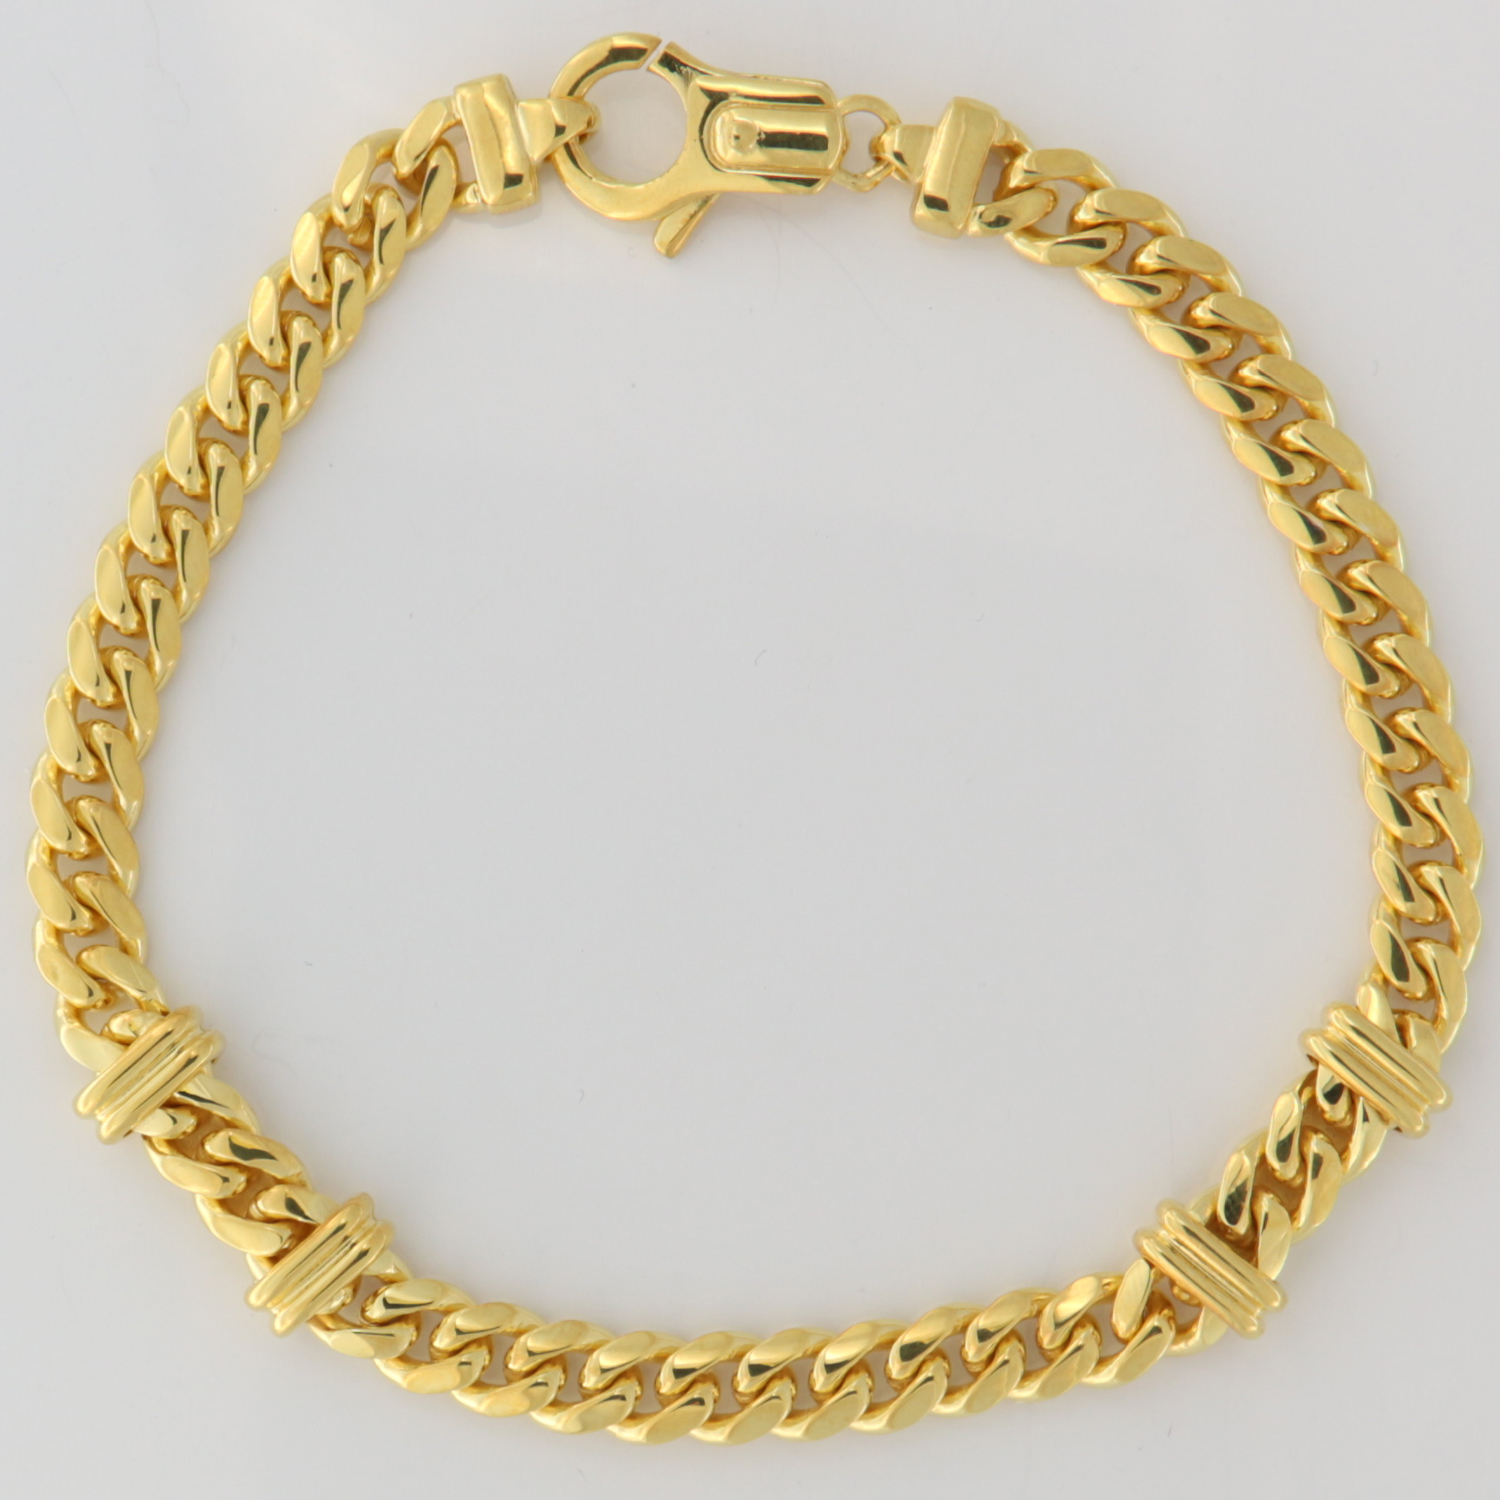 Bracelet men's loops with bands gold plated-image